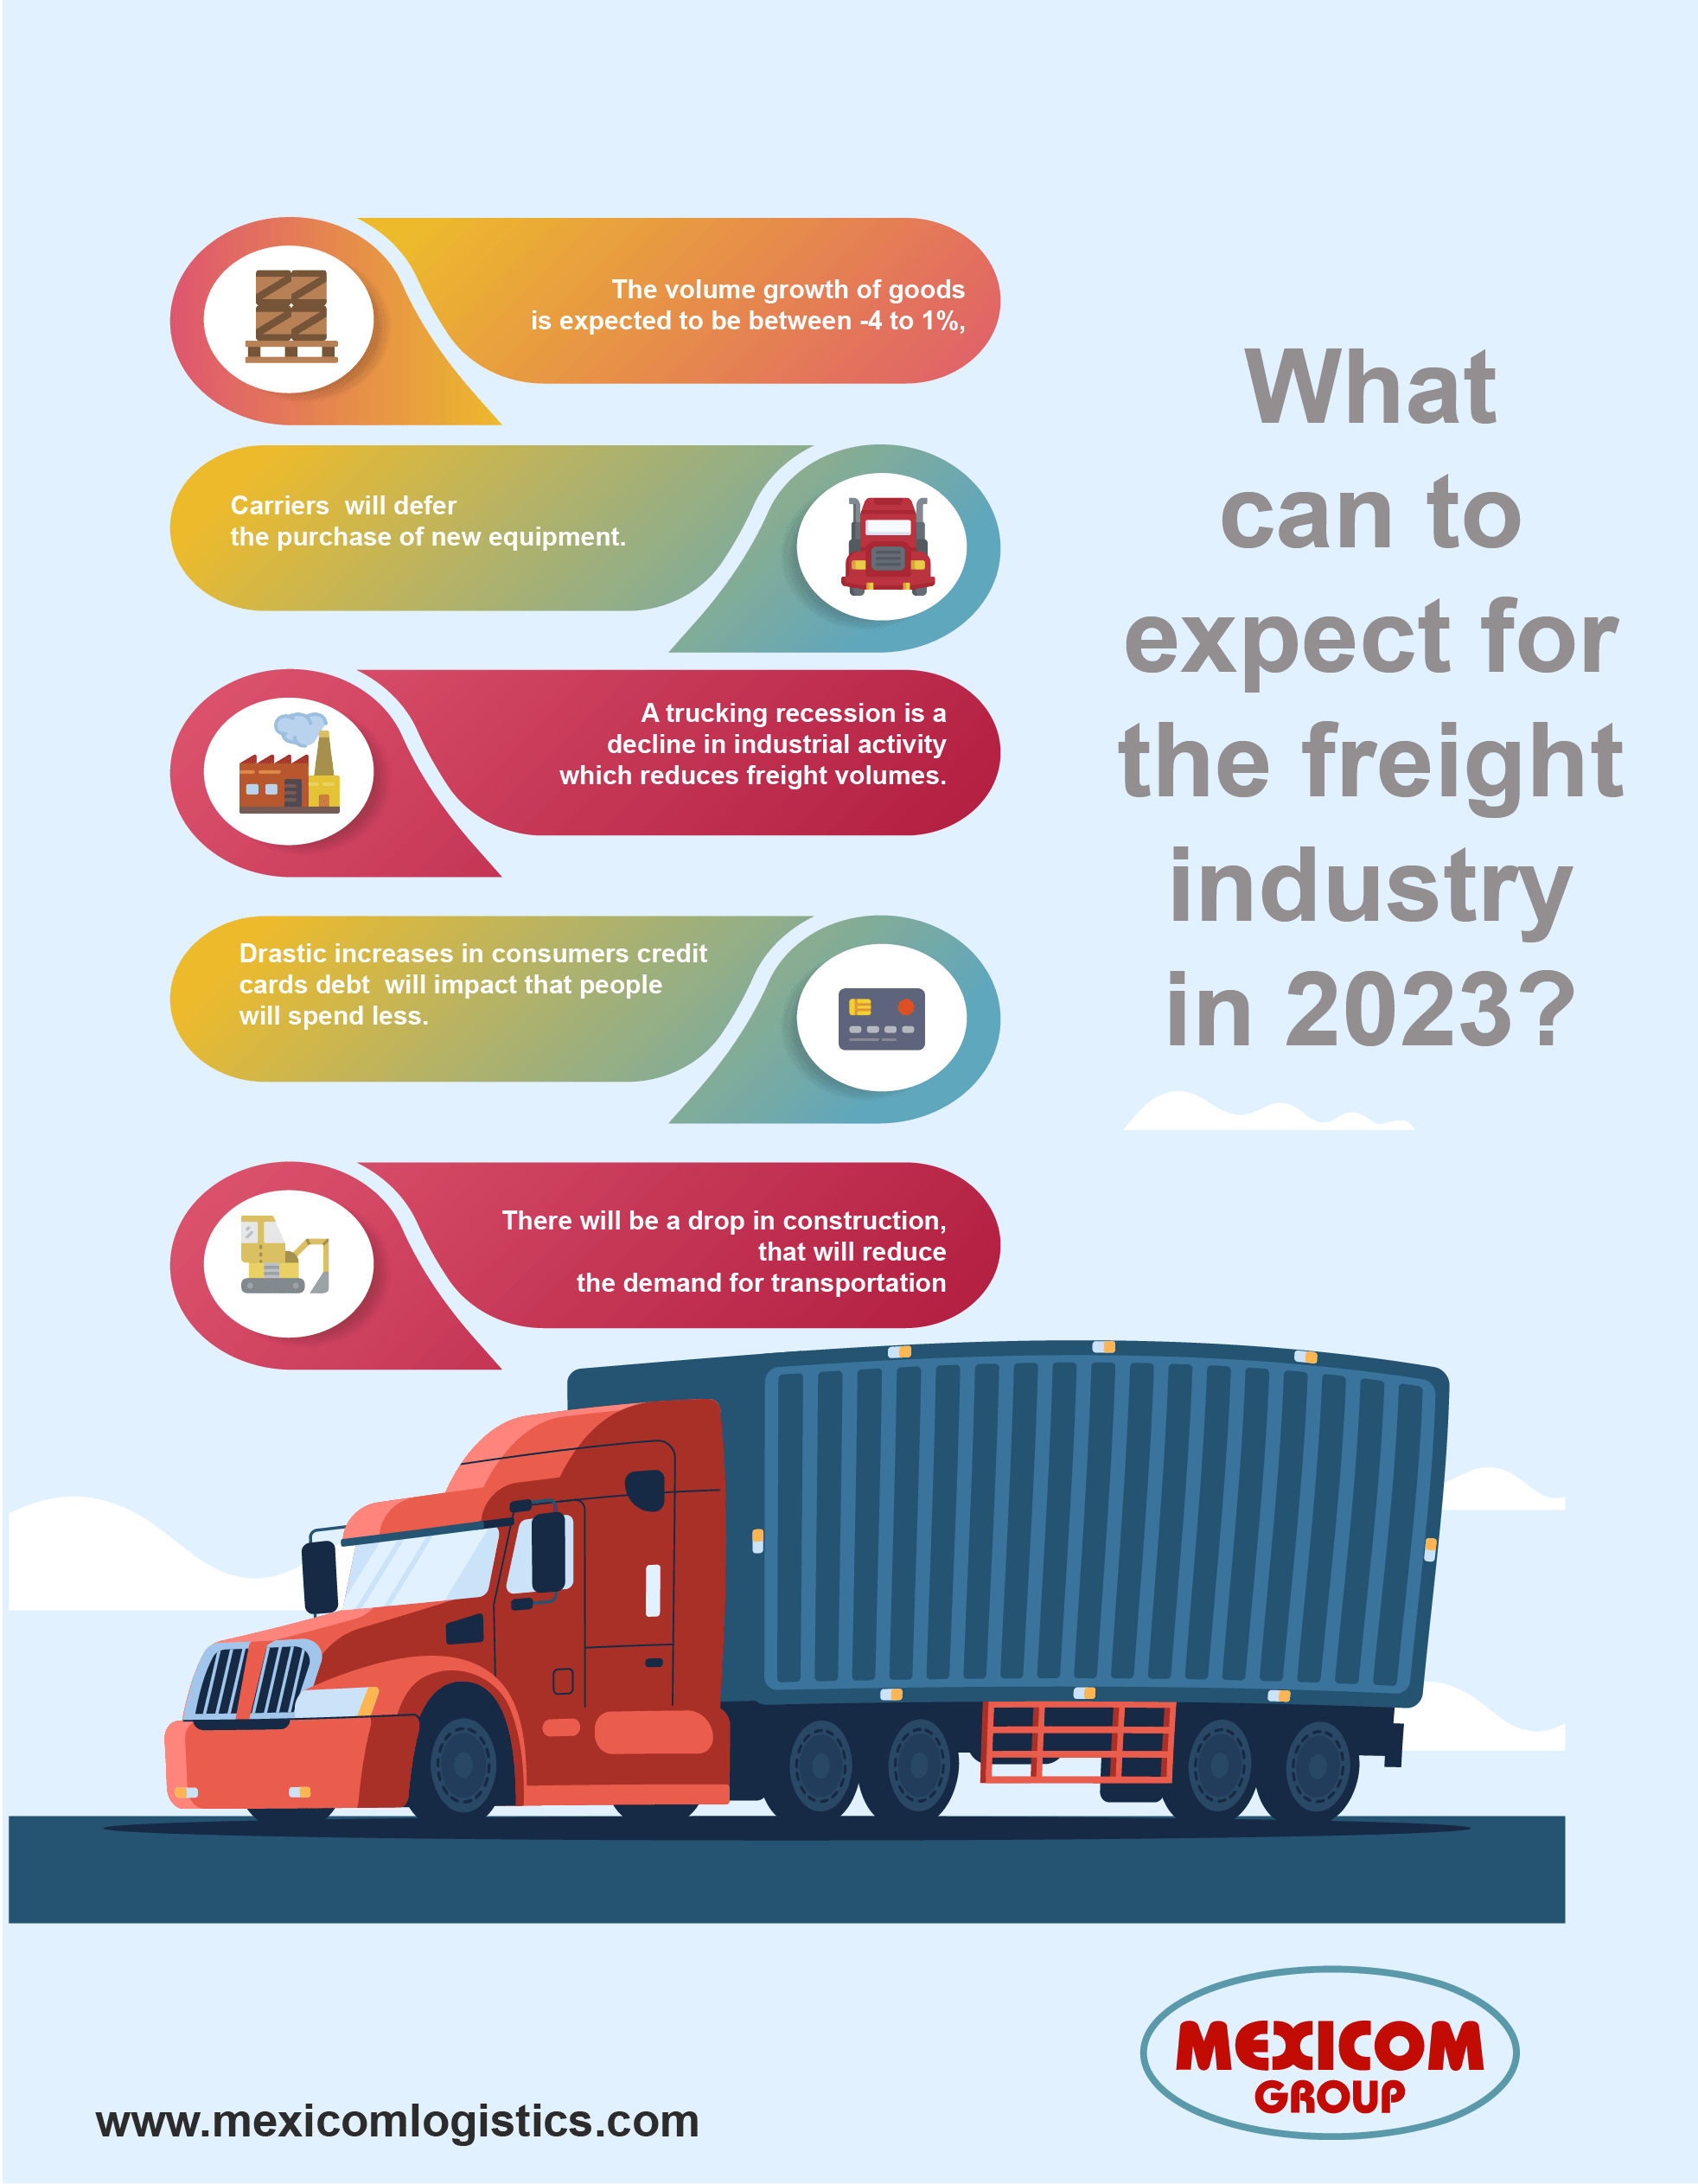 Freight Shipping Industry Forecast 2023 Logistics